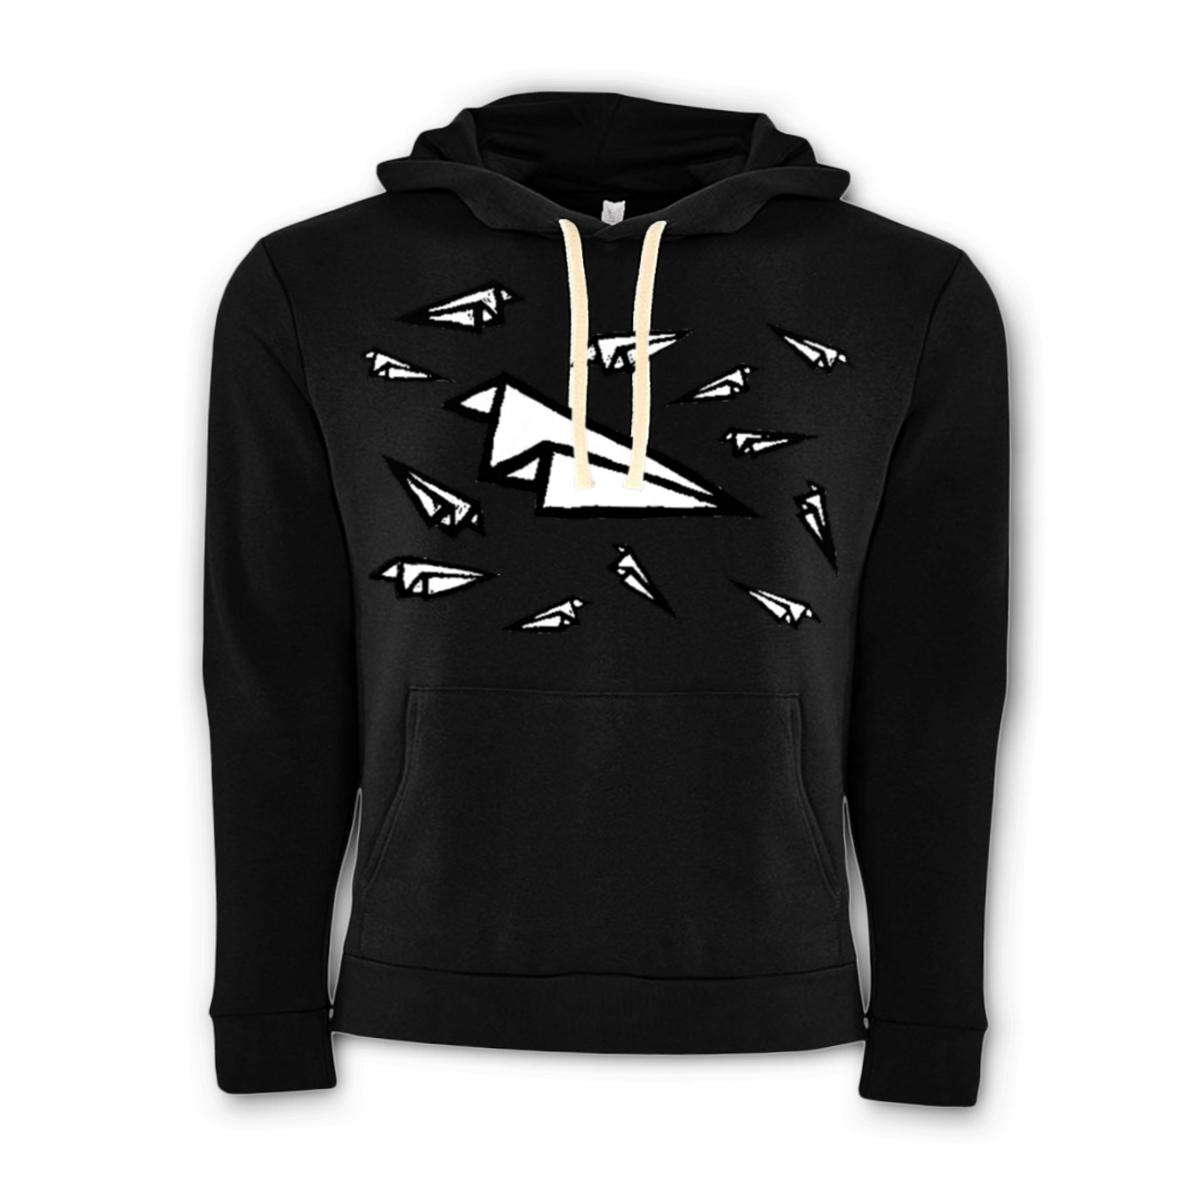 Airplane Frenzy Unisex Pullover Hoodie Small black